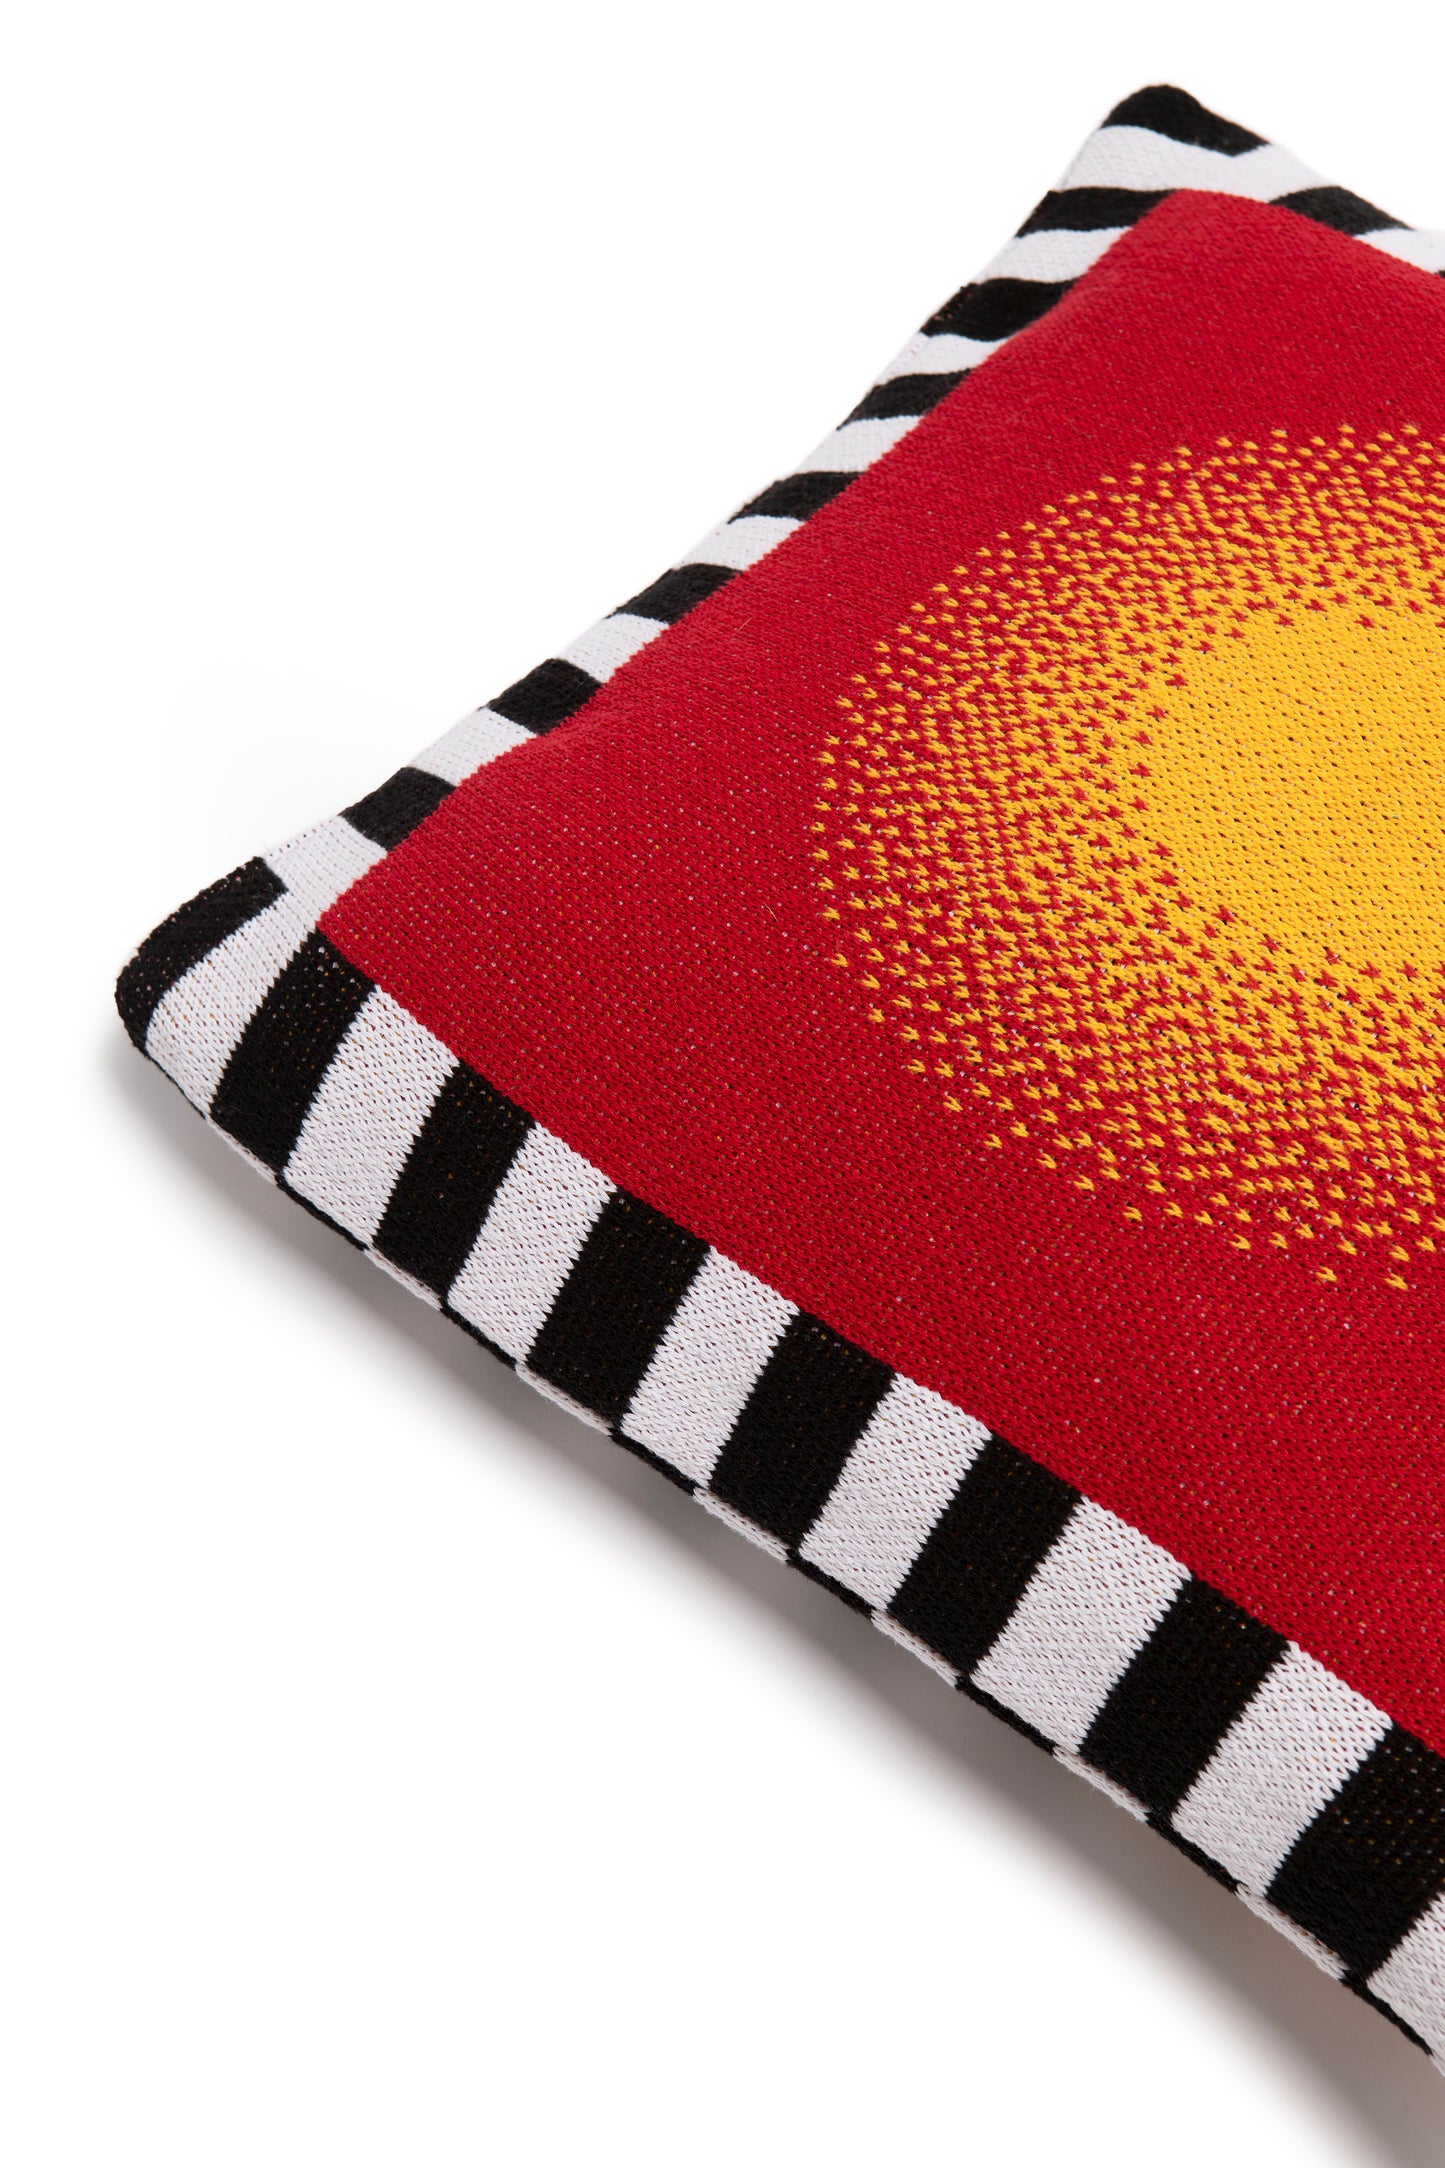 Close up image of burst pillow cover showing the corner of the pillow with the black and white stripe border and a yellow circle gradually going into a red background.